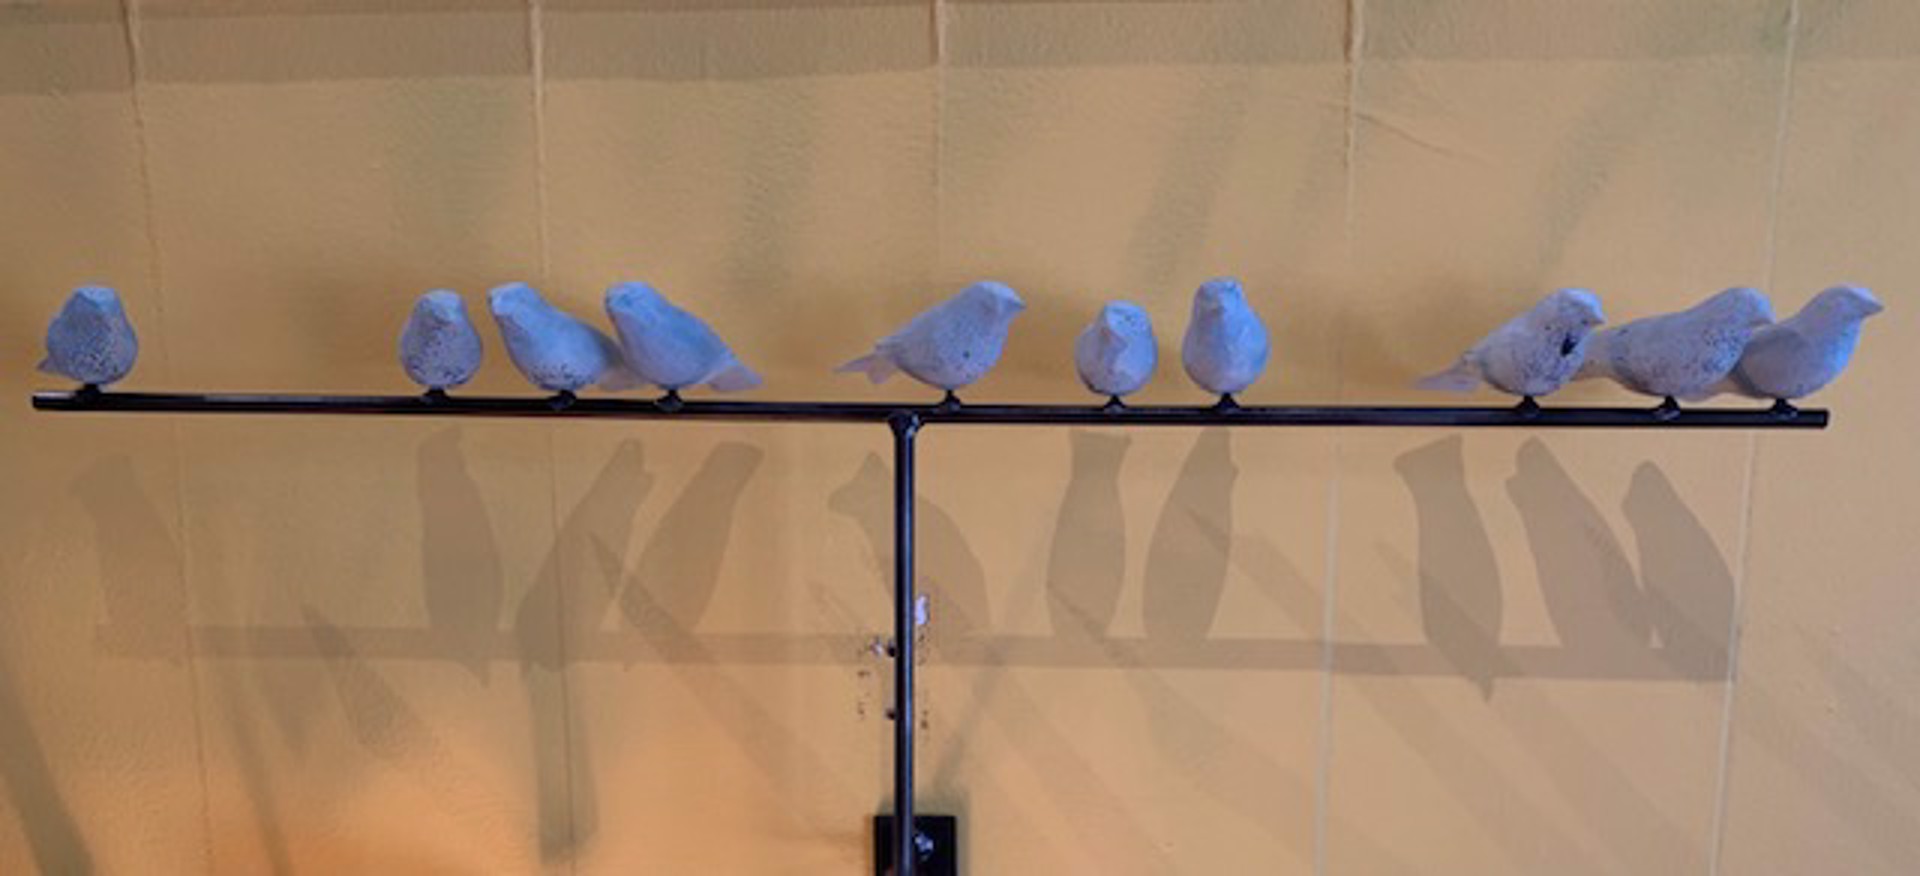 10 Birds on a Wire by Rory Burke